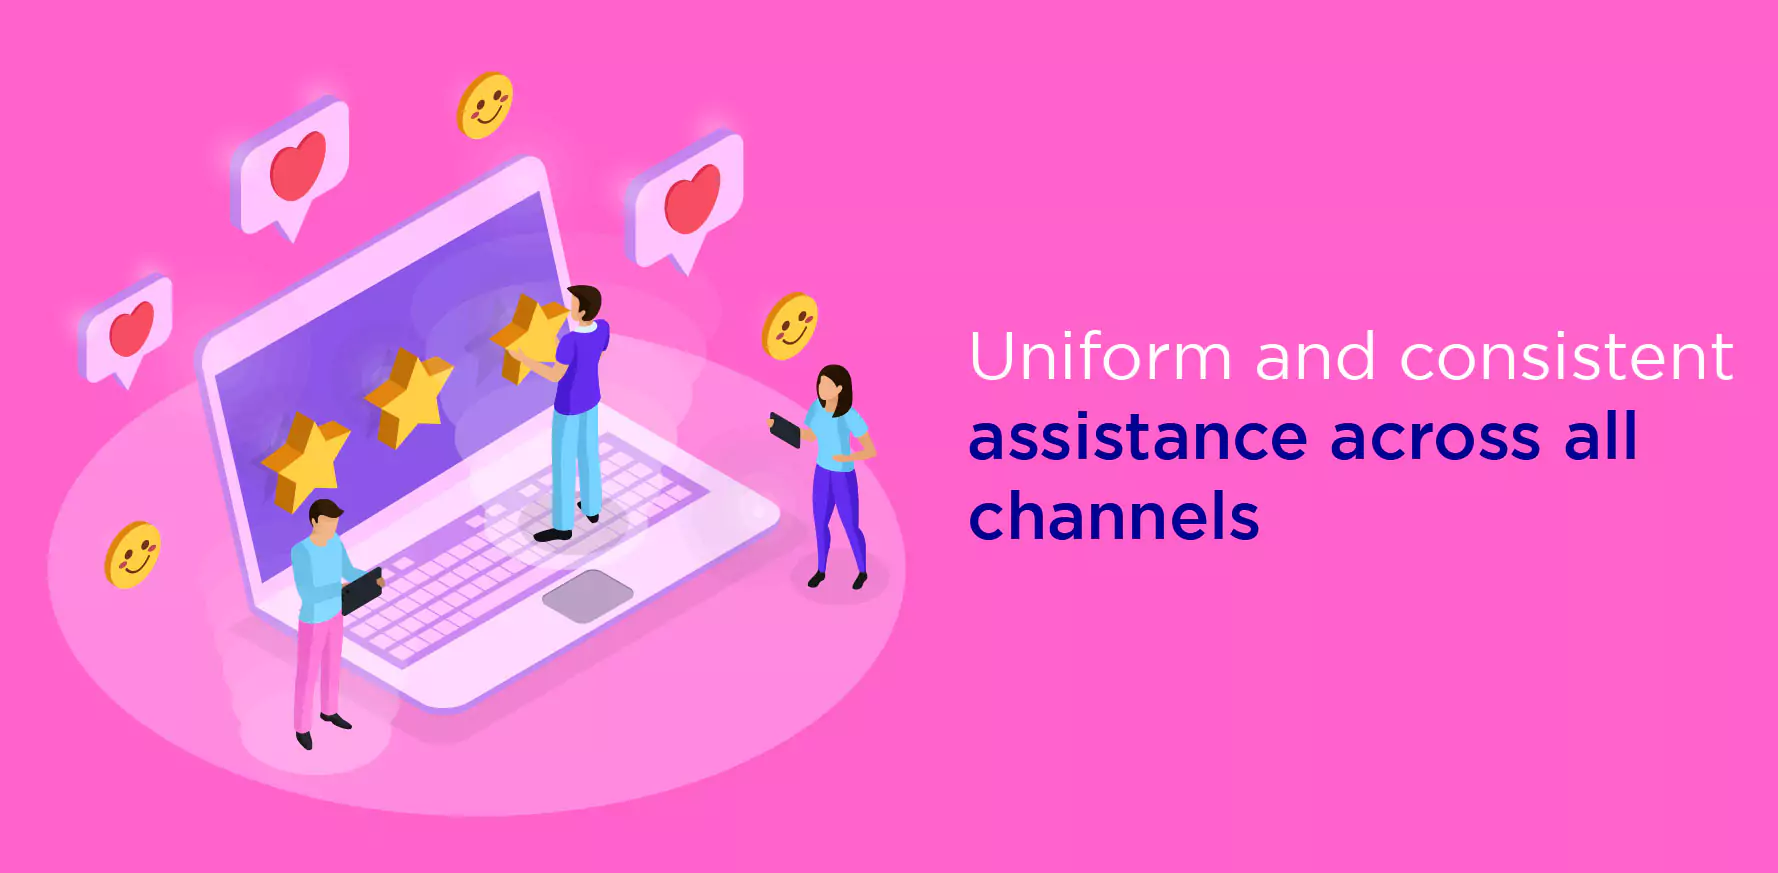 Considering the importance of having uniform and consistent assistance across all channels: